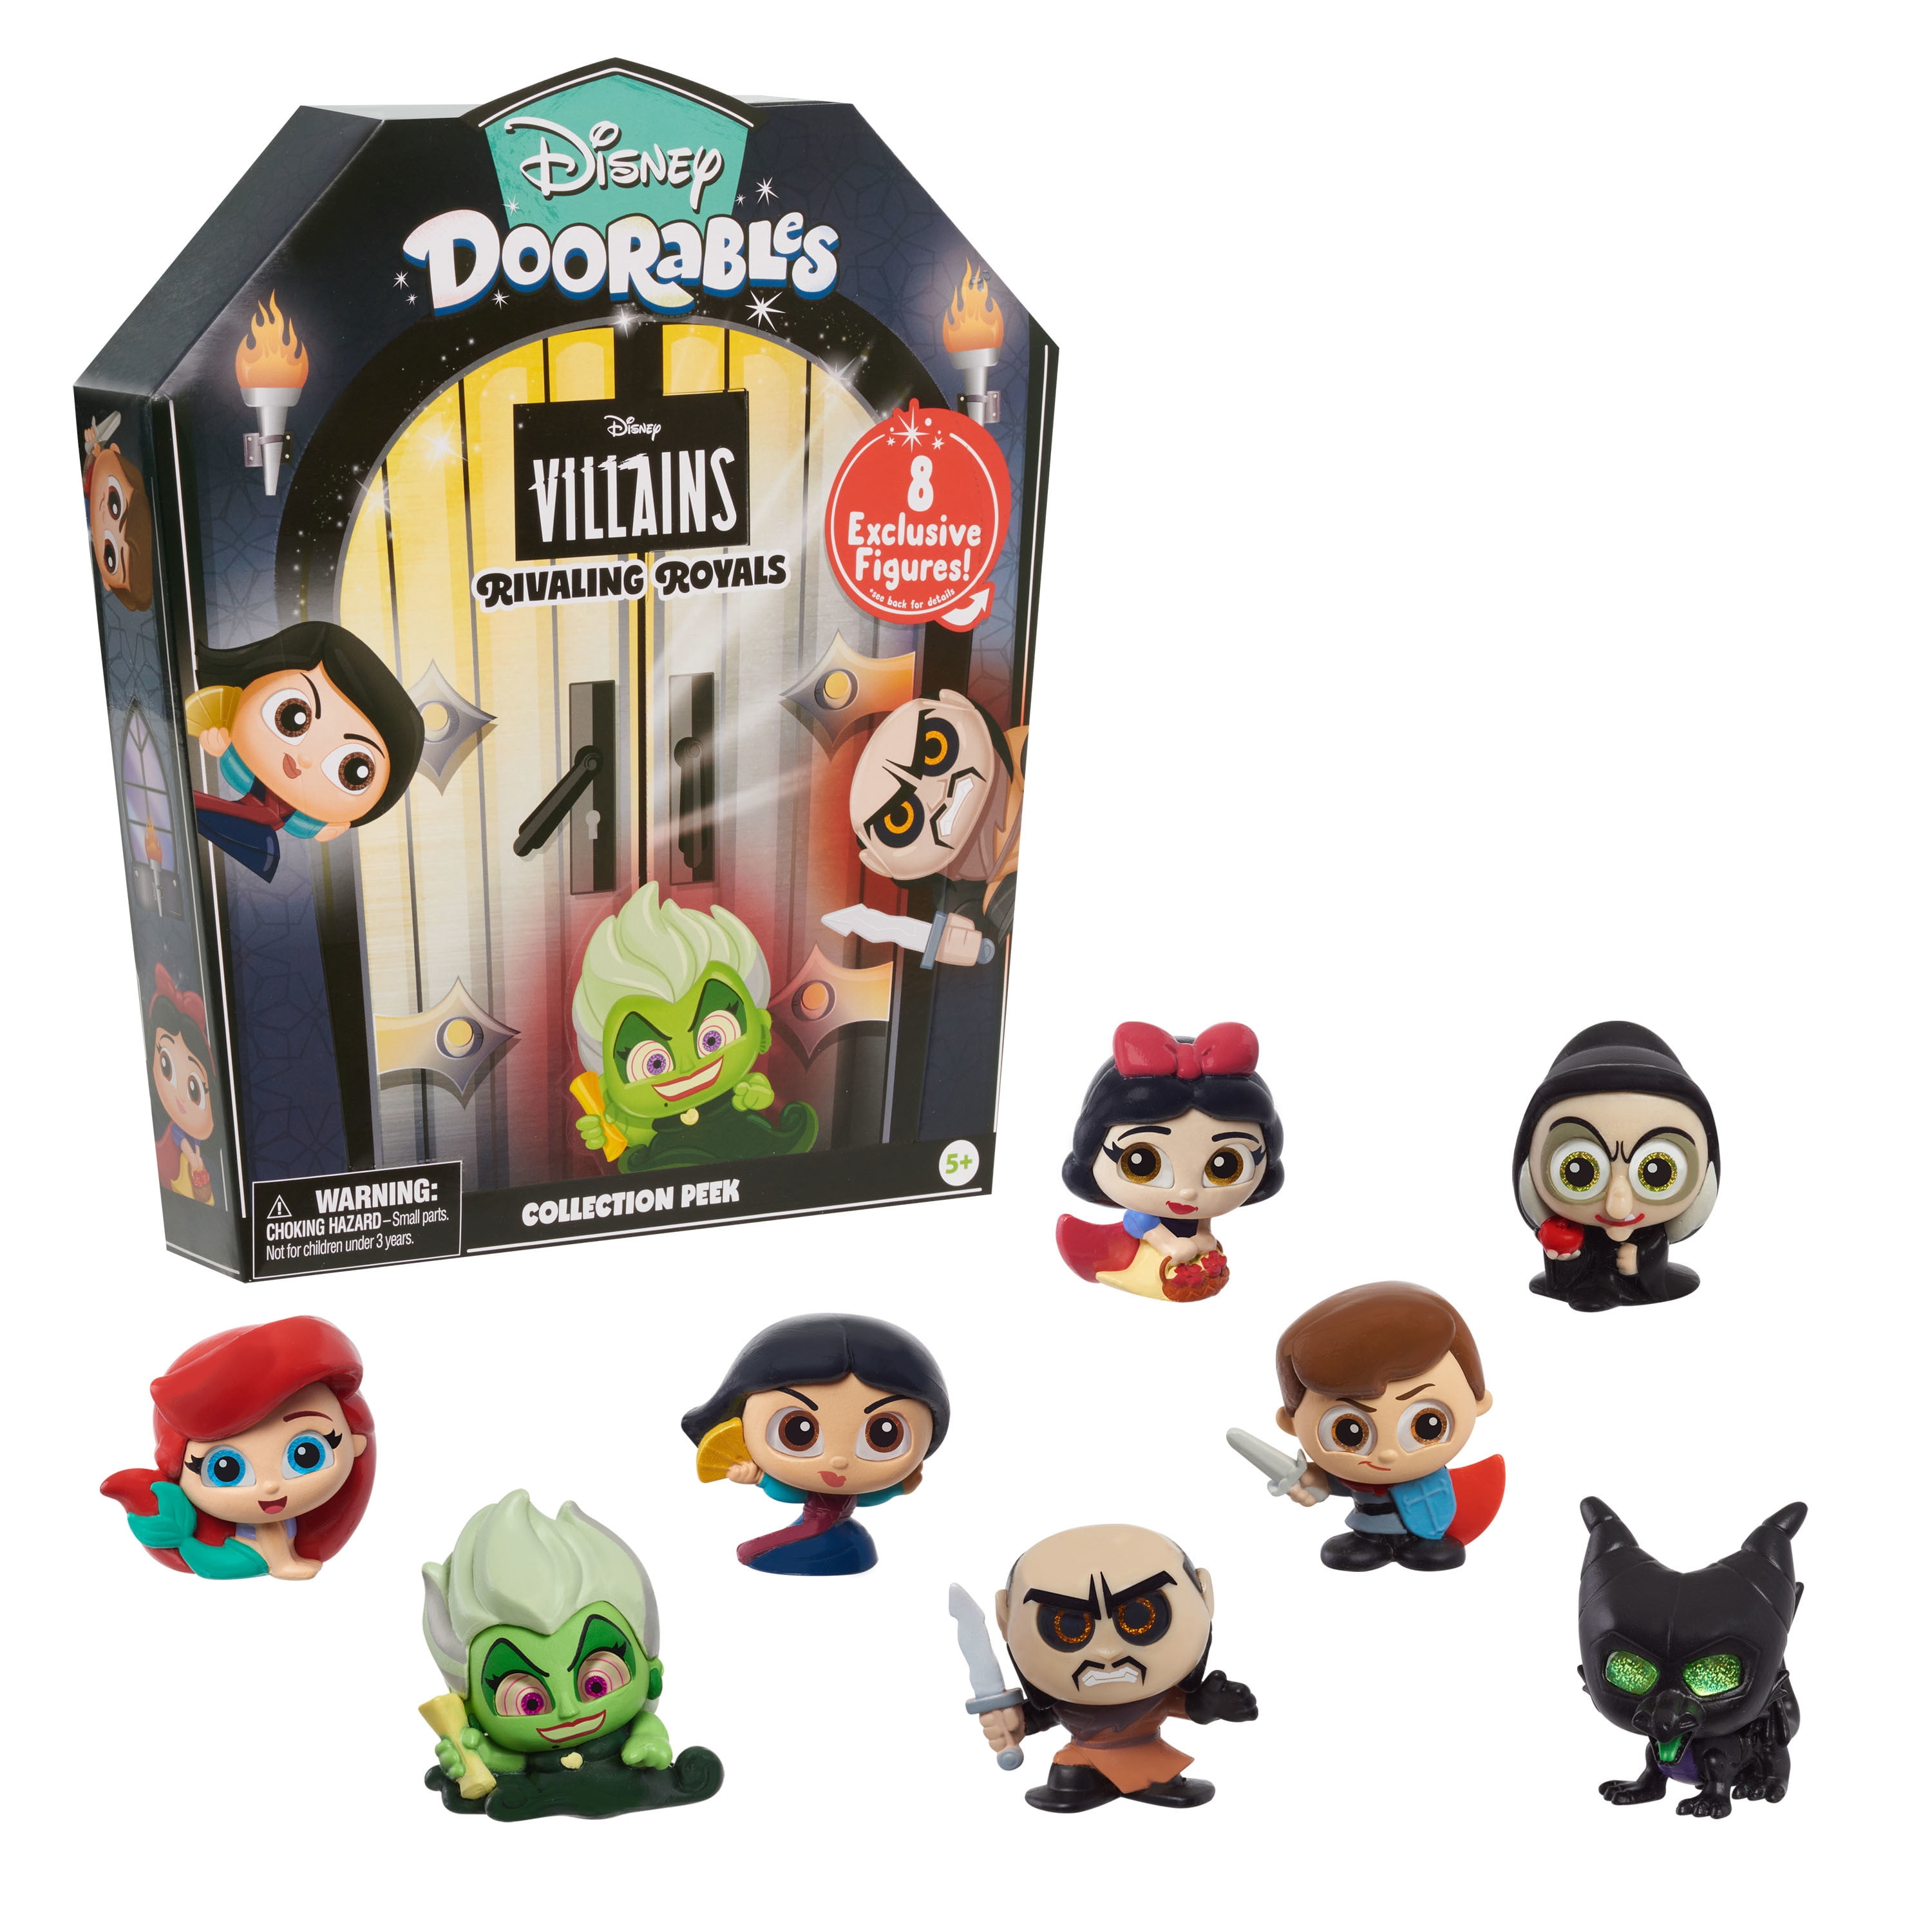 Disney Doorables Rivaling Royals Collection Peek, Blind Bag Collectible Figures, Officially Licensed Kids Toys for Ages 3 Up, Gifts and Presents